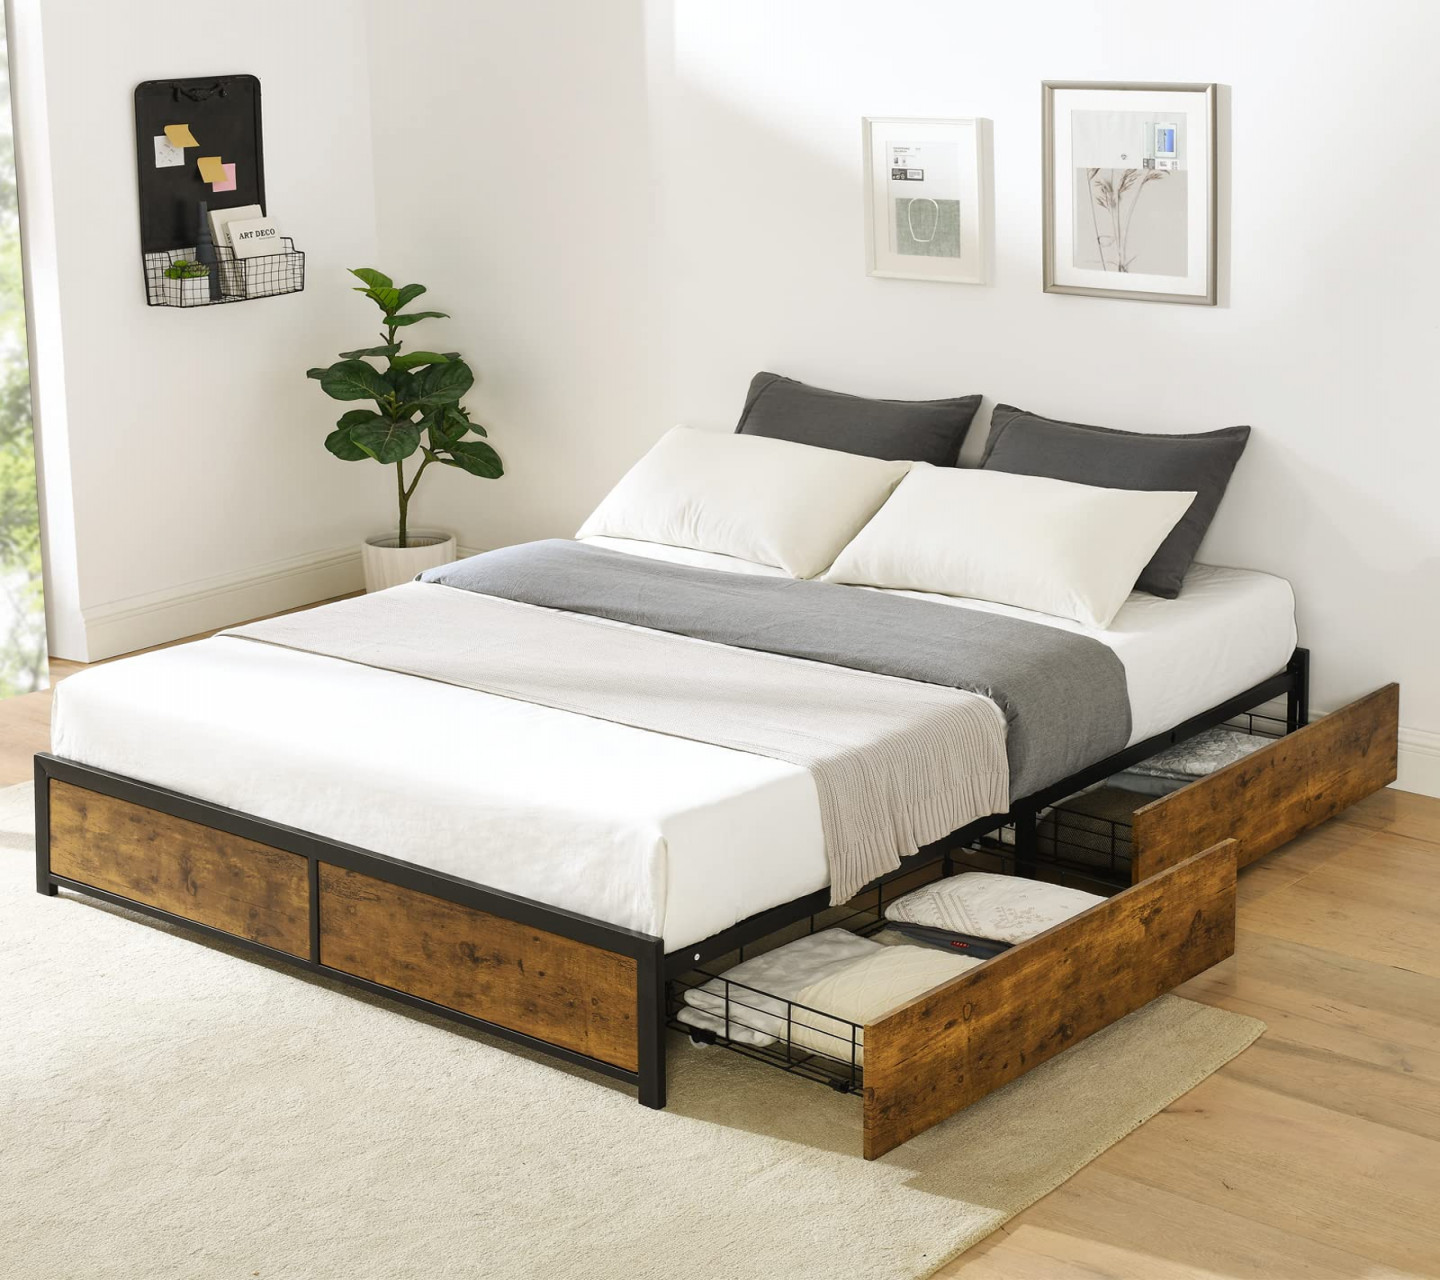 Alohappy Full Size Bed Frame with Storage, Metal Platform Bed Frame Full  with Sturdy Steel Slats and  Large Storage Drawers, Noise Free No Box  Spring